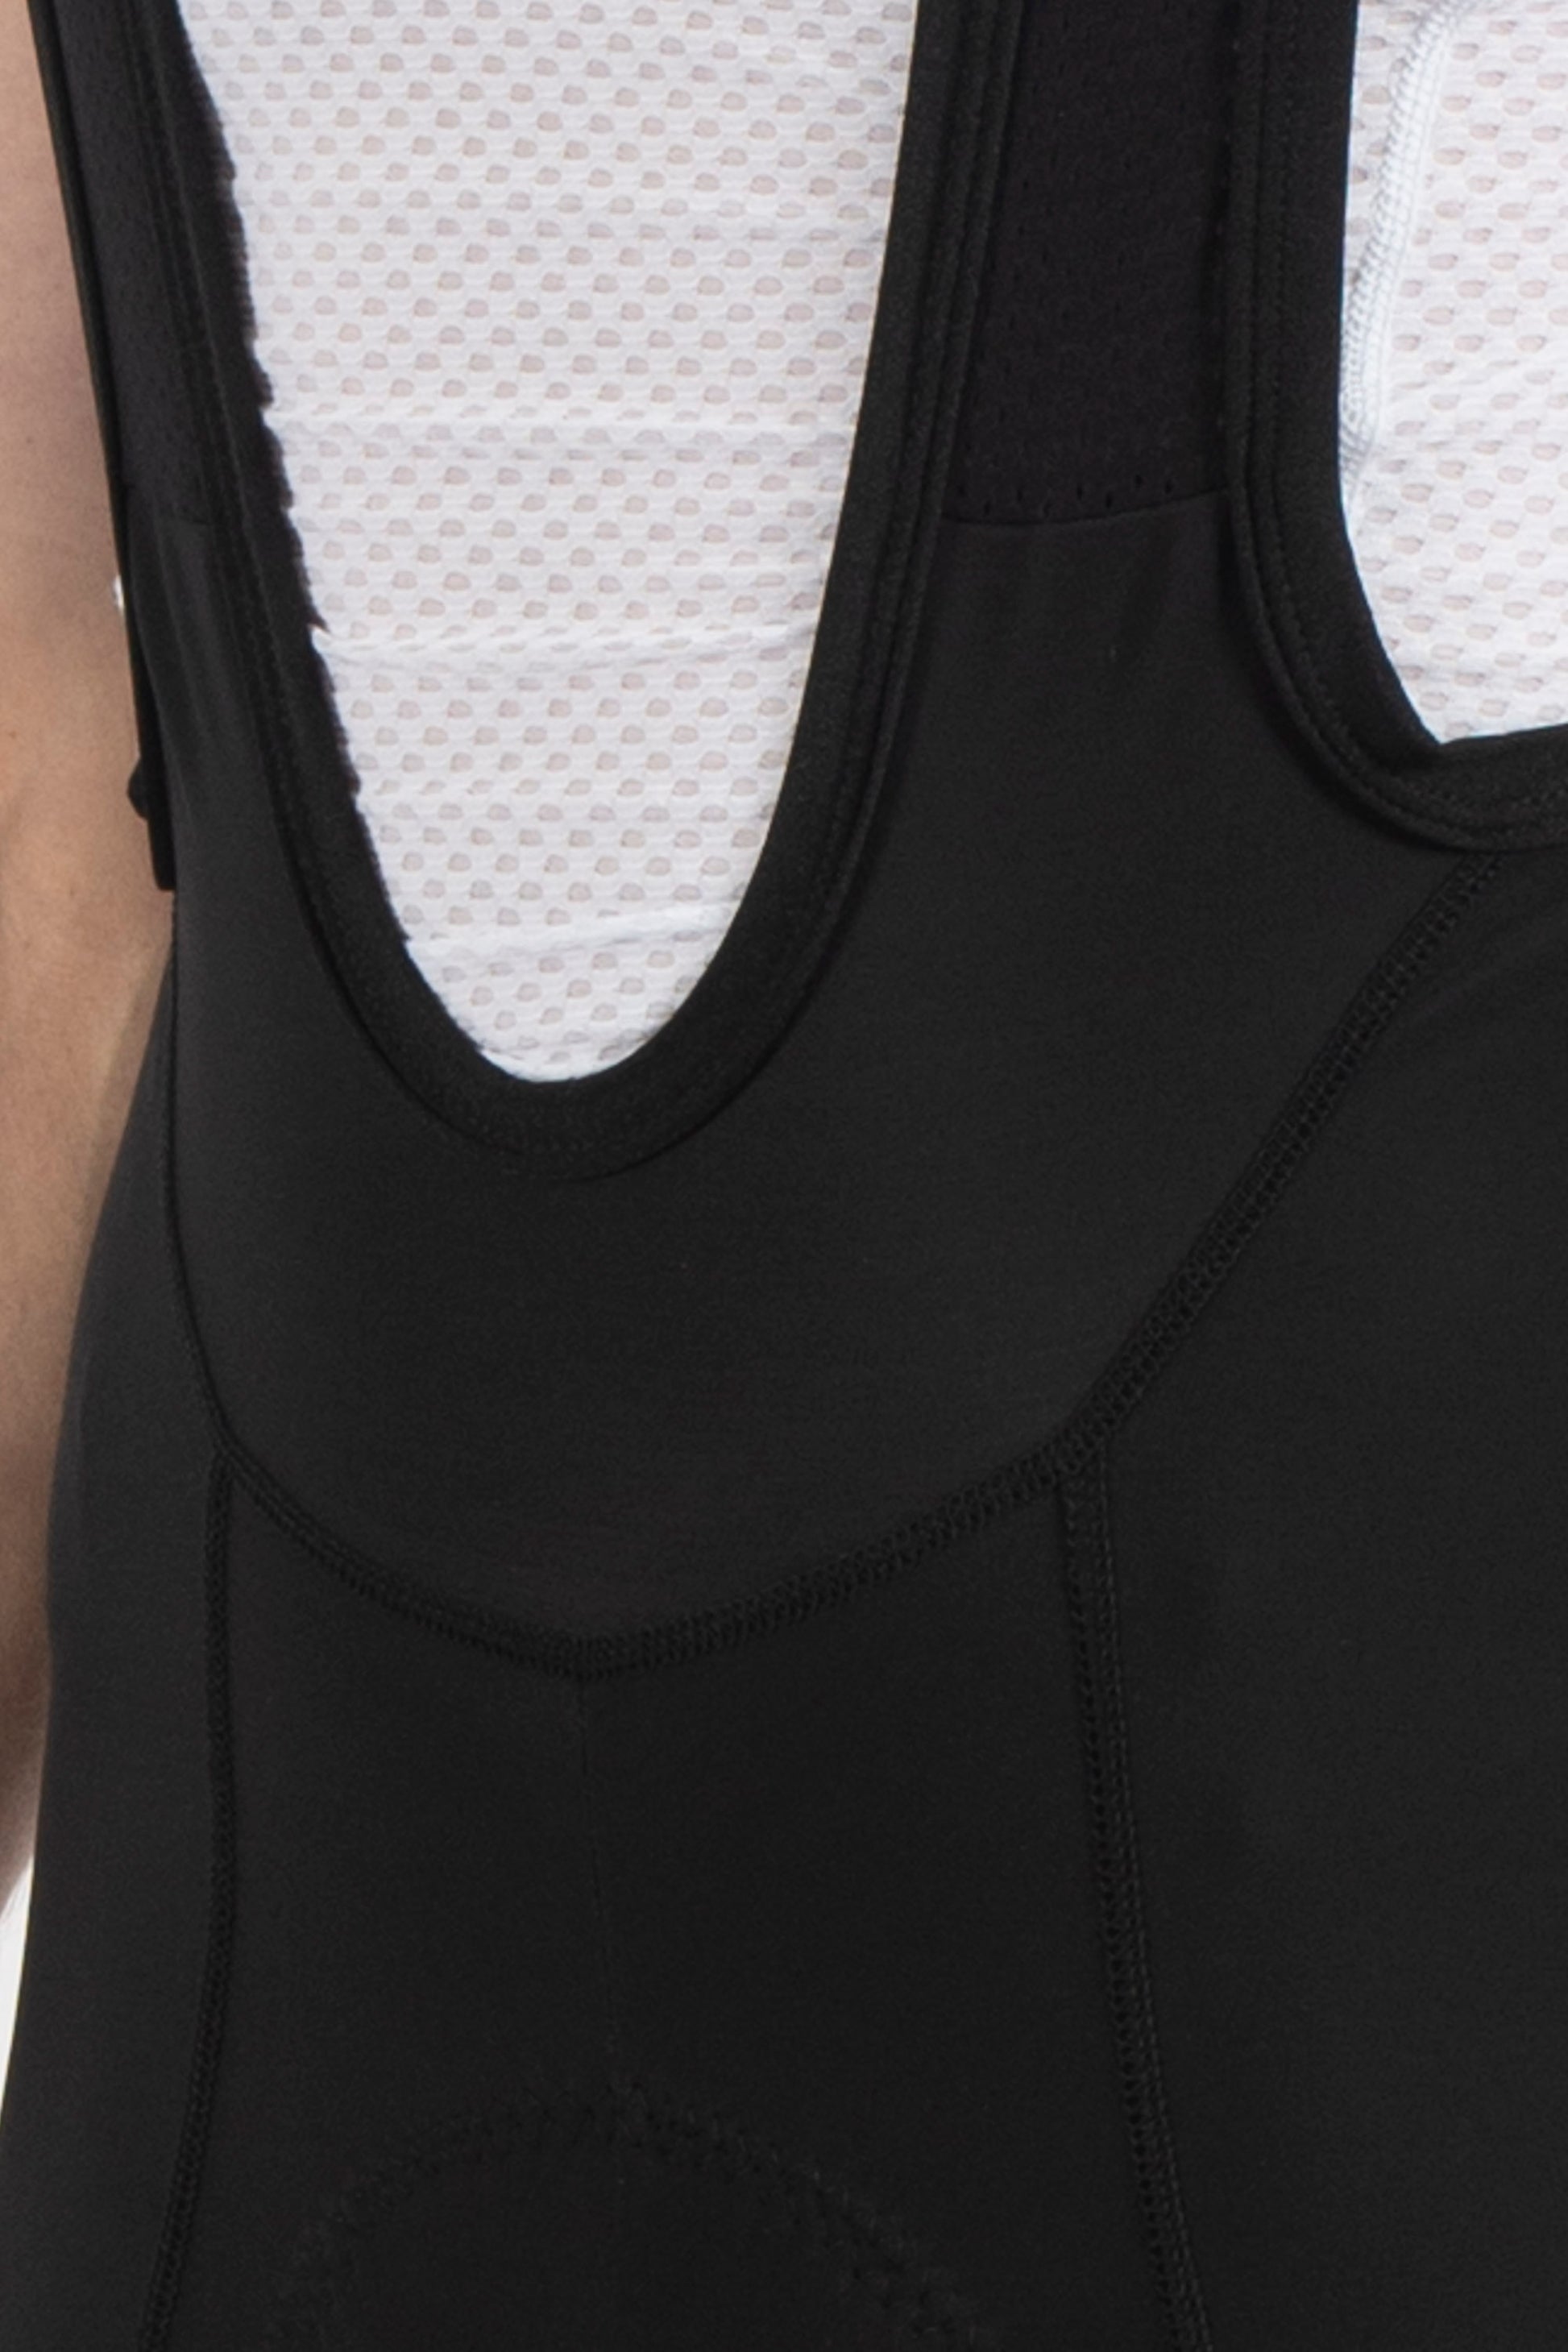 2-Zero Repel Thermal Bibshorts - Lusso Cycle Wear